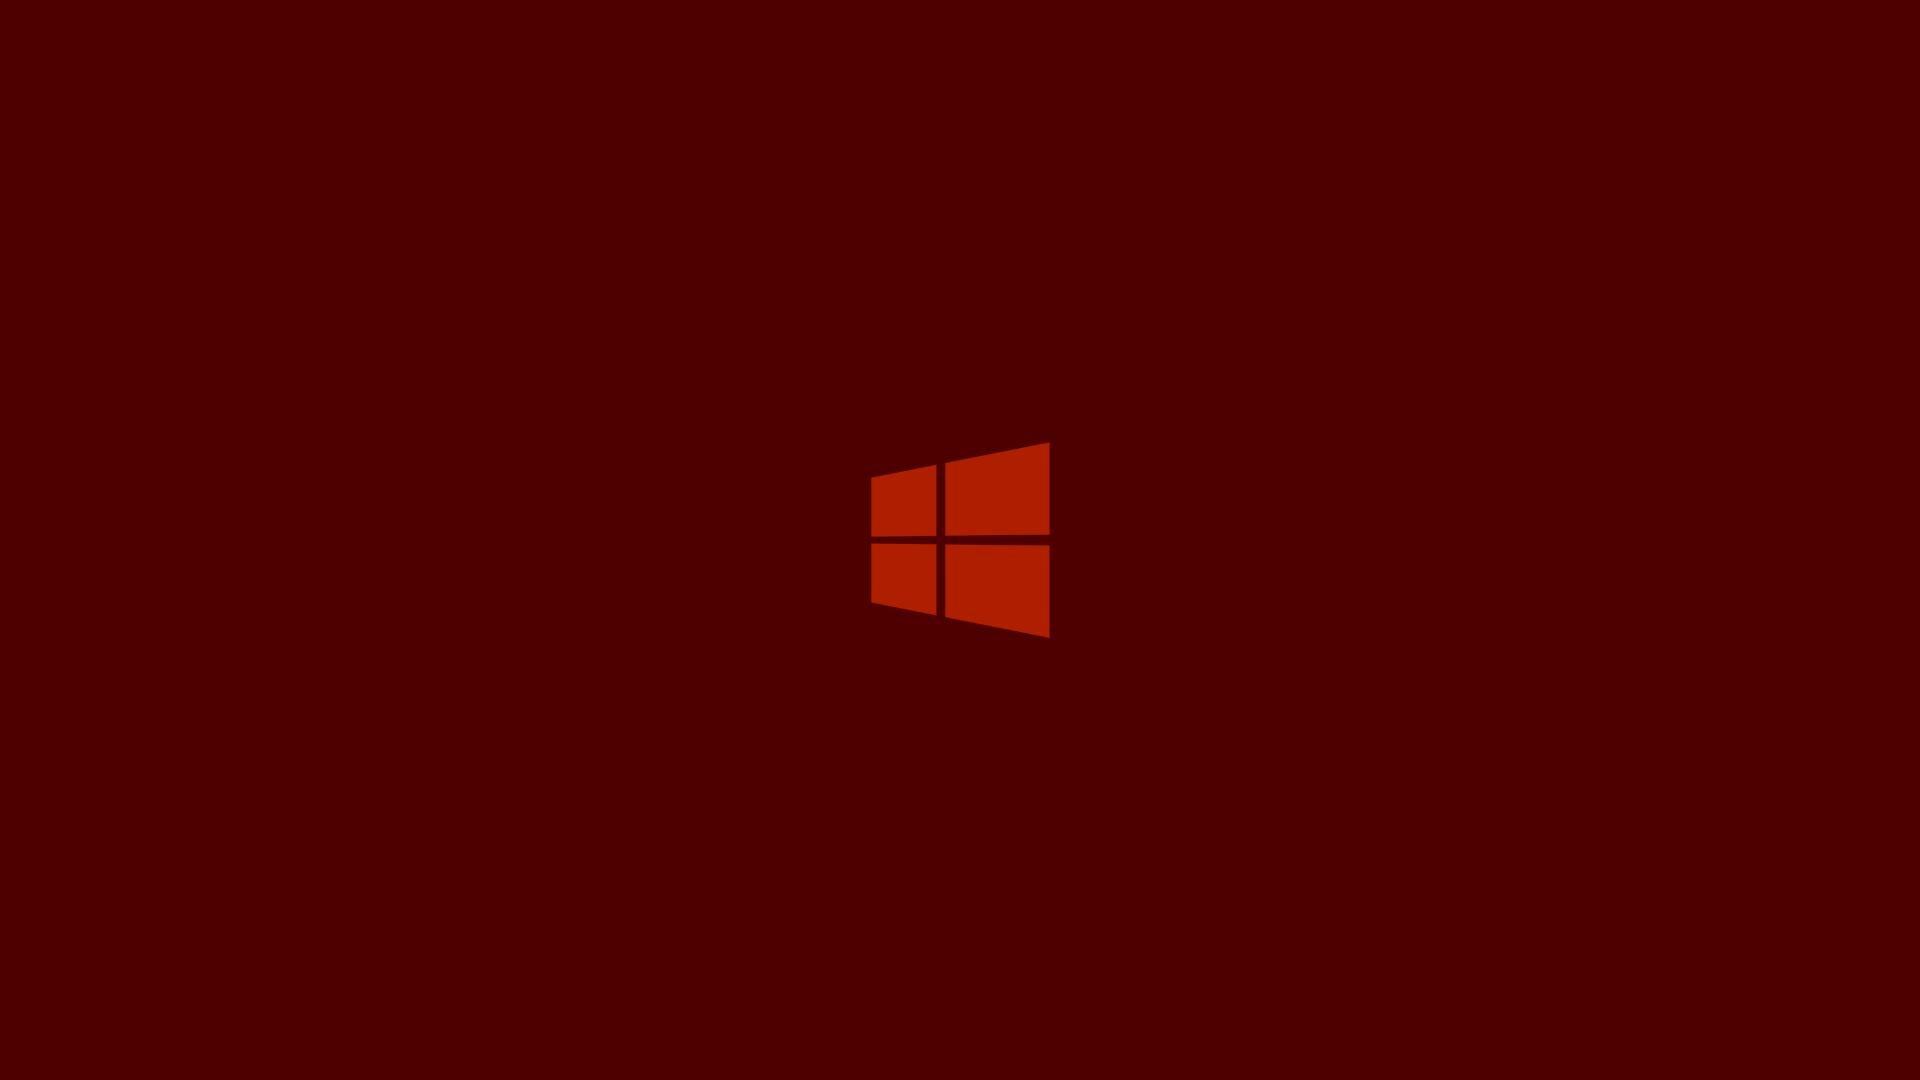 Red Windows Phone Wallpapers Top Free Red Windows Phone